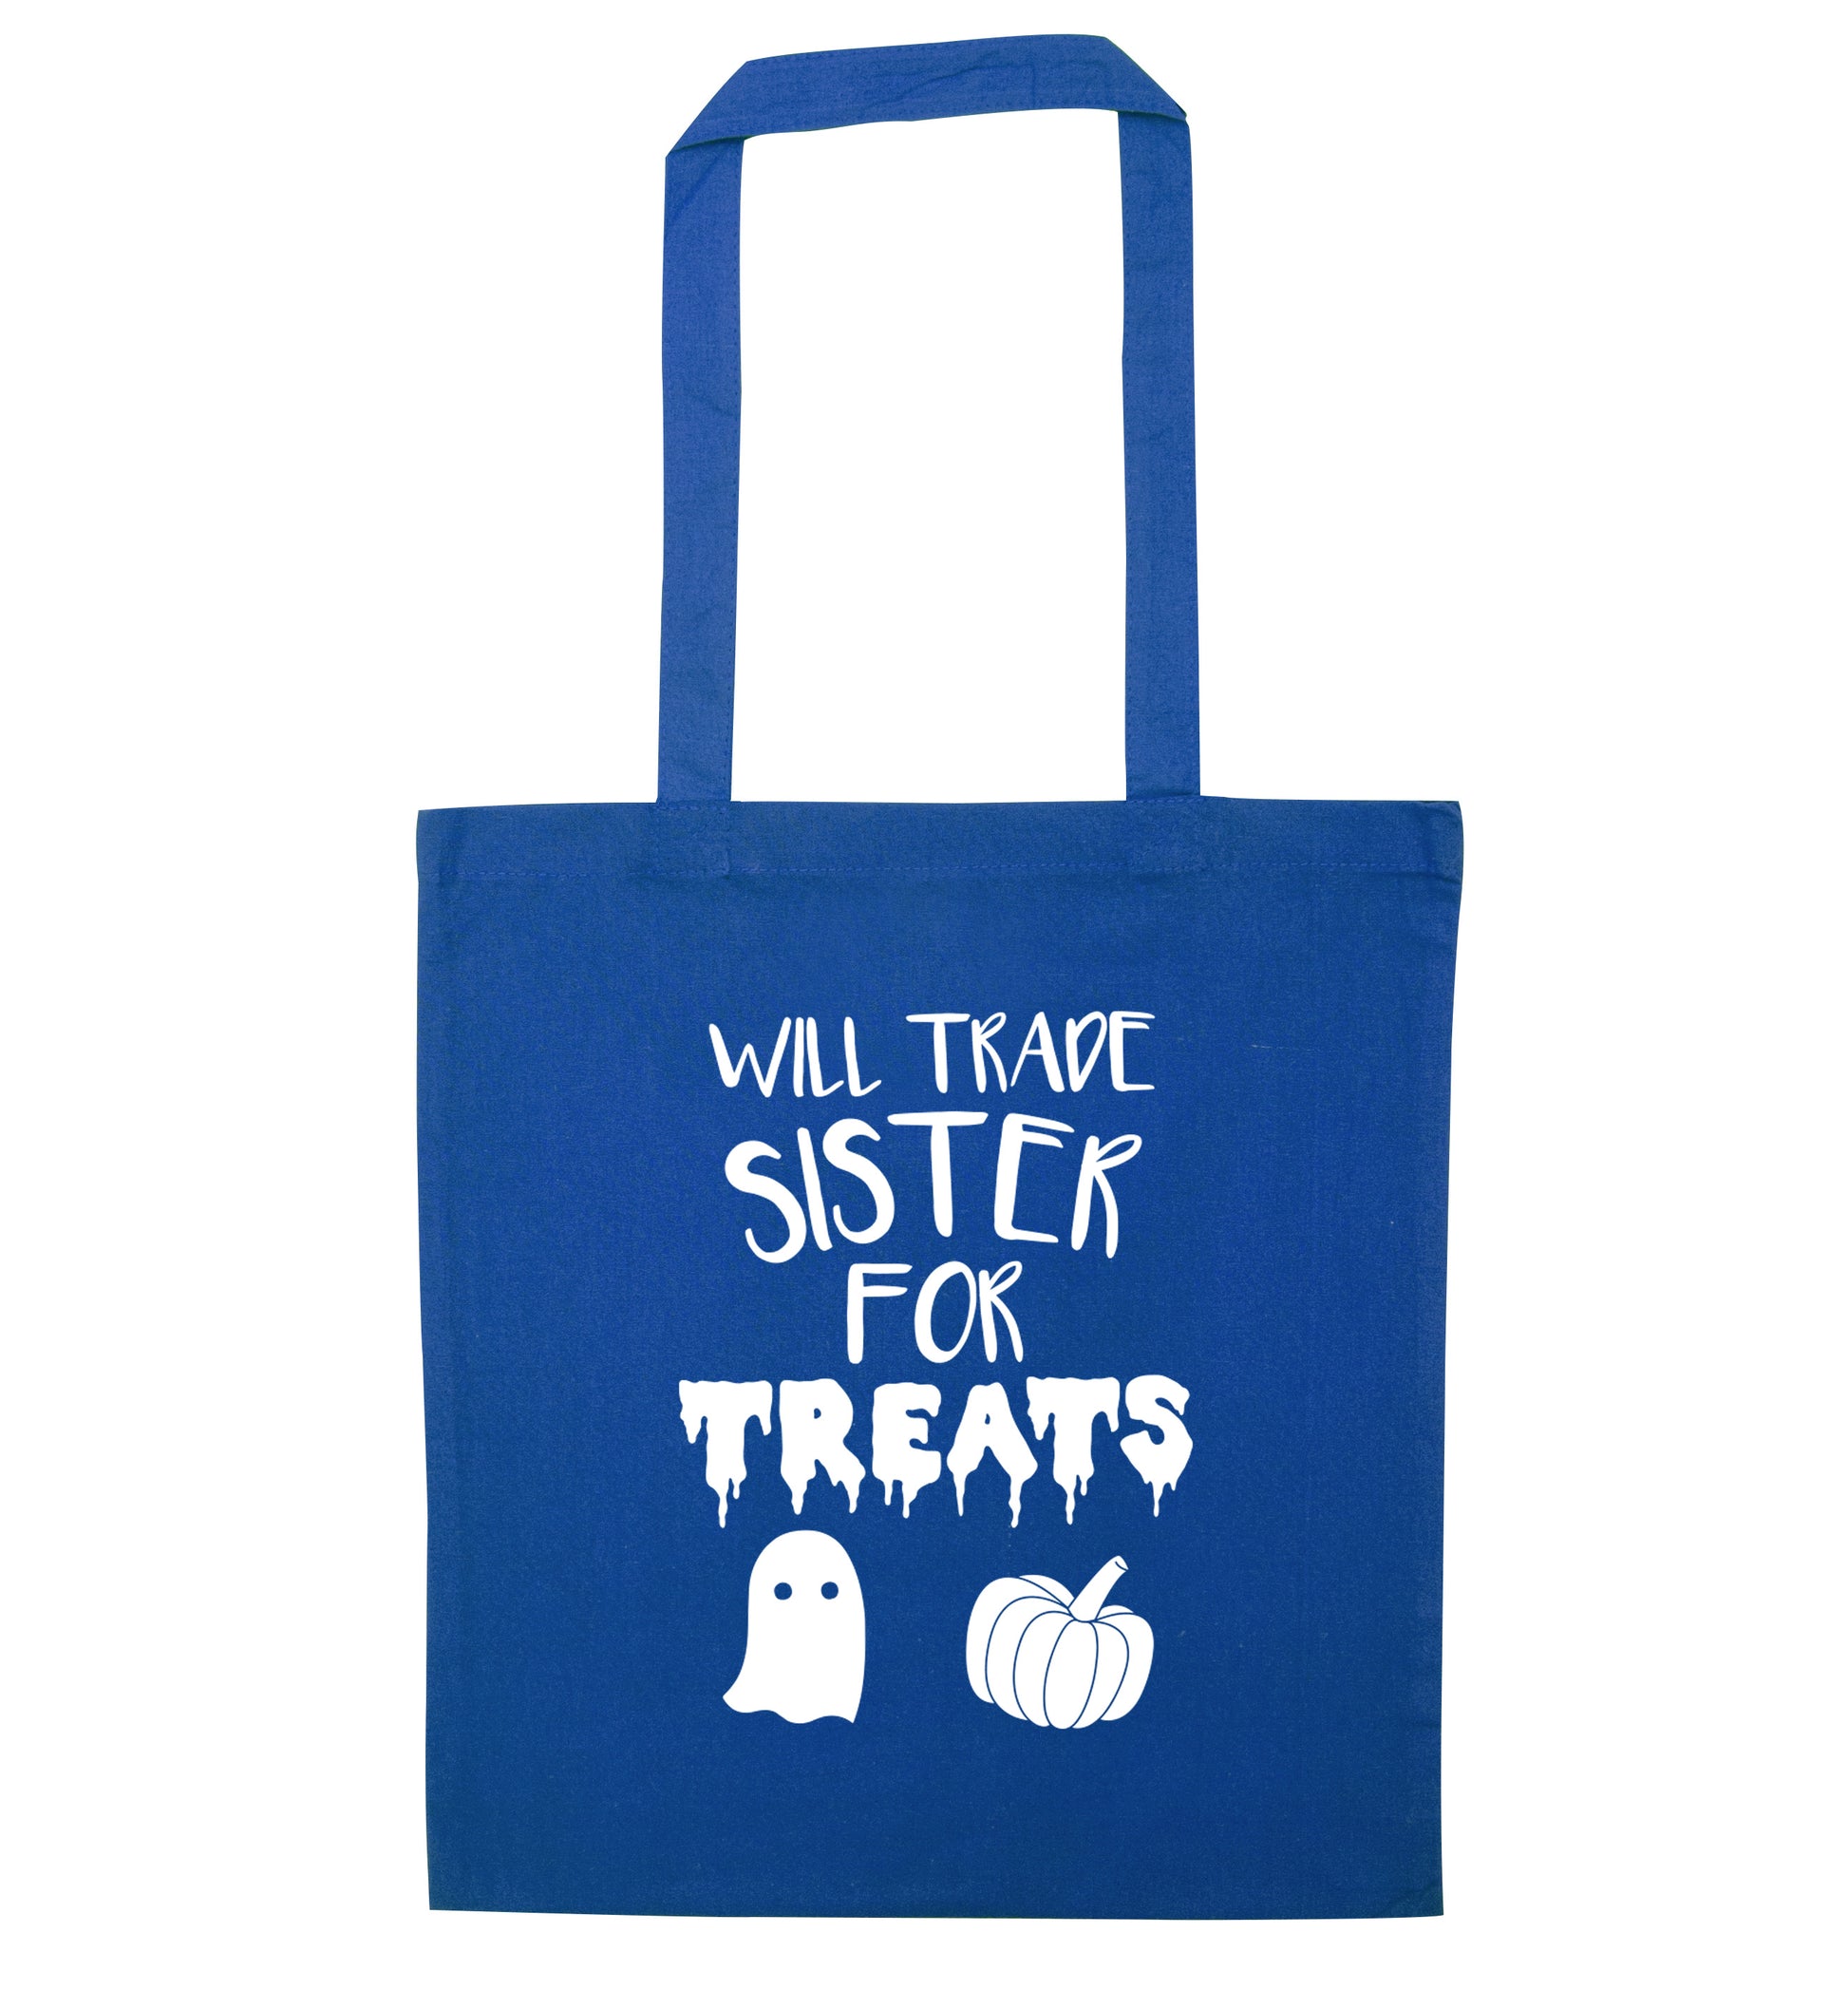 Will trade sister for sweets blue tote bag